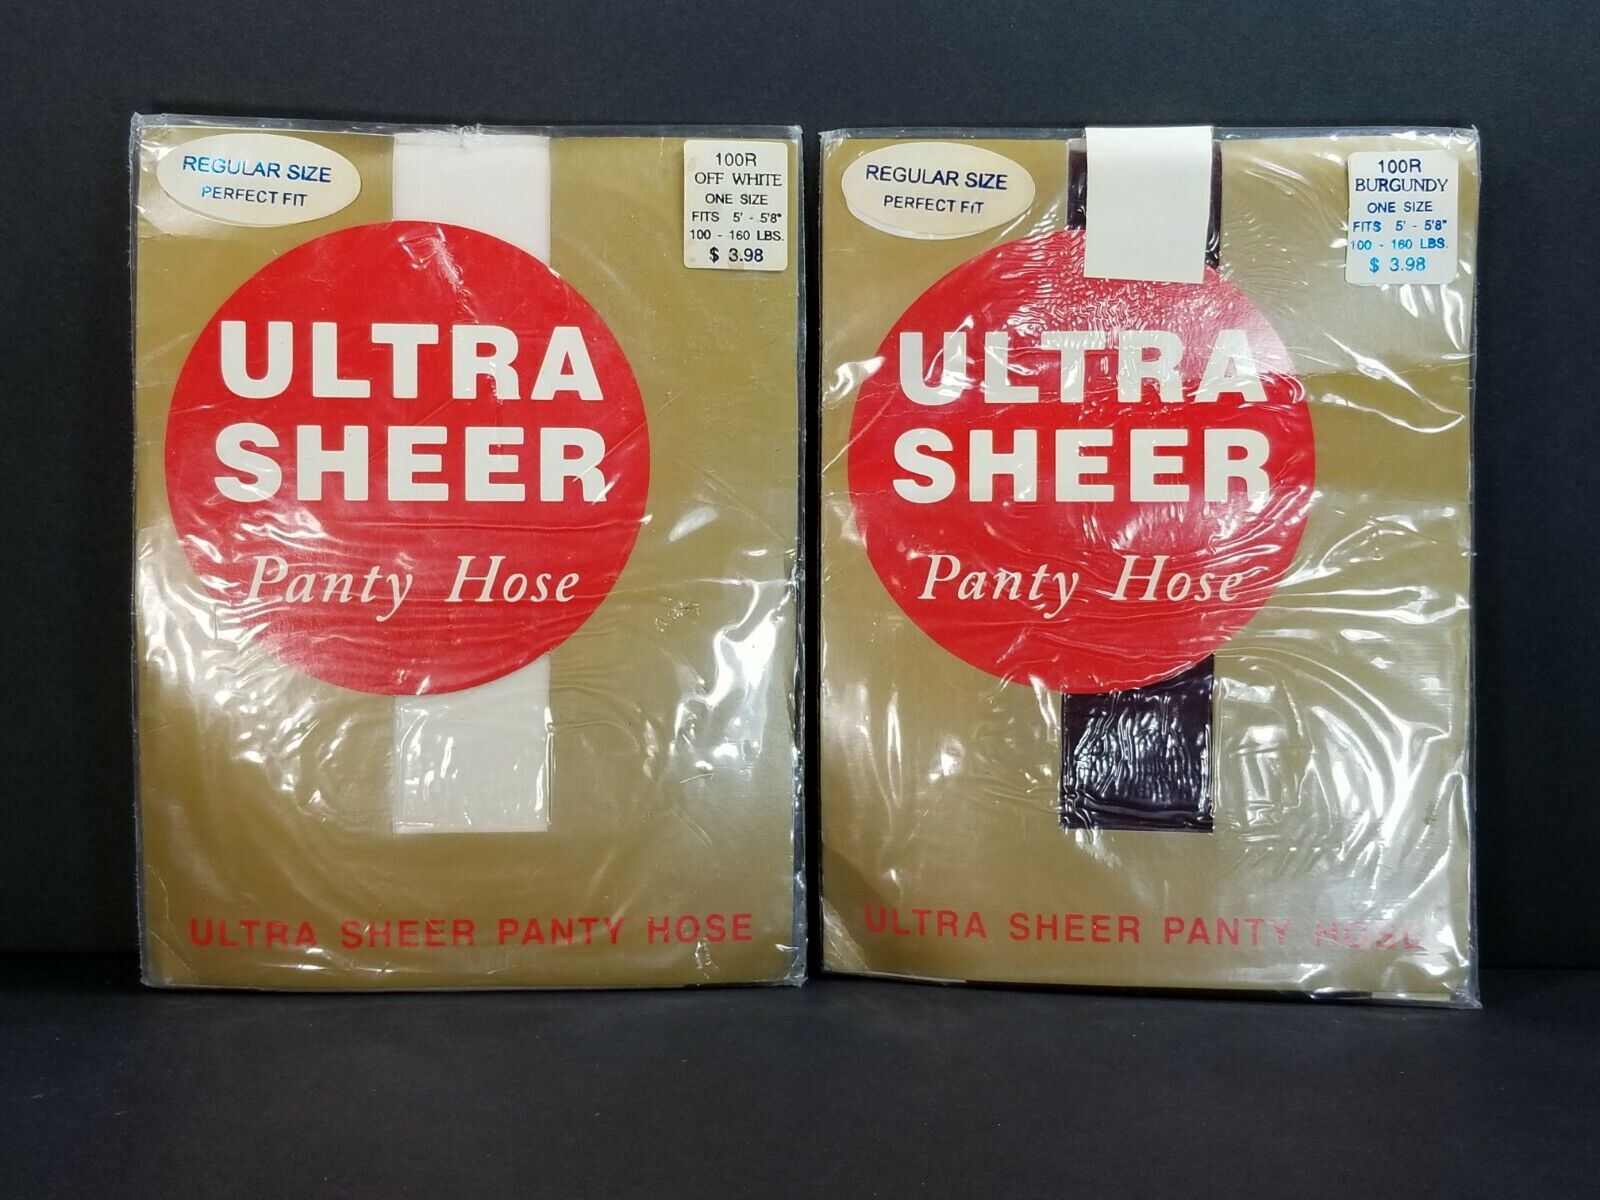 Vintage 80s Lot of 6 Ultra Sheer Panty Hose in Assorted Colors Regular Size 100R Ultra Sheer Does Not Apply - фотография #5